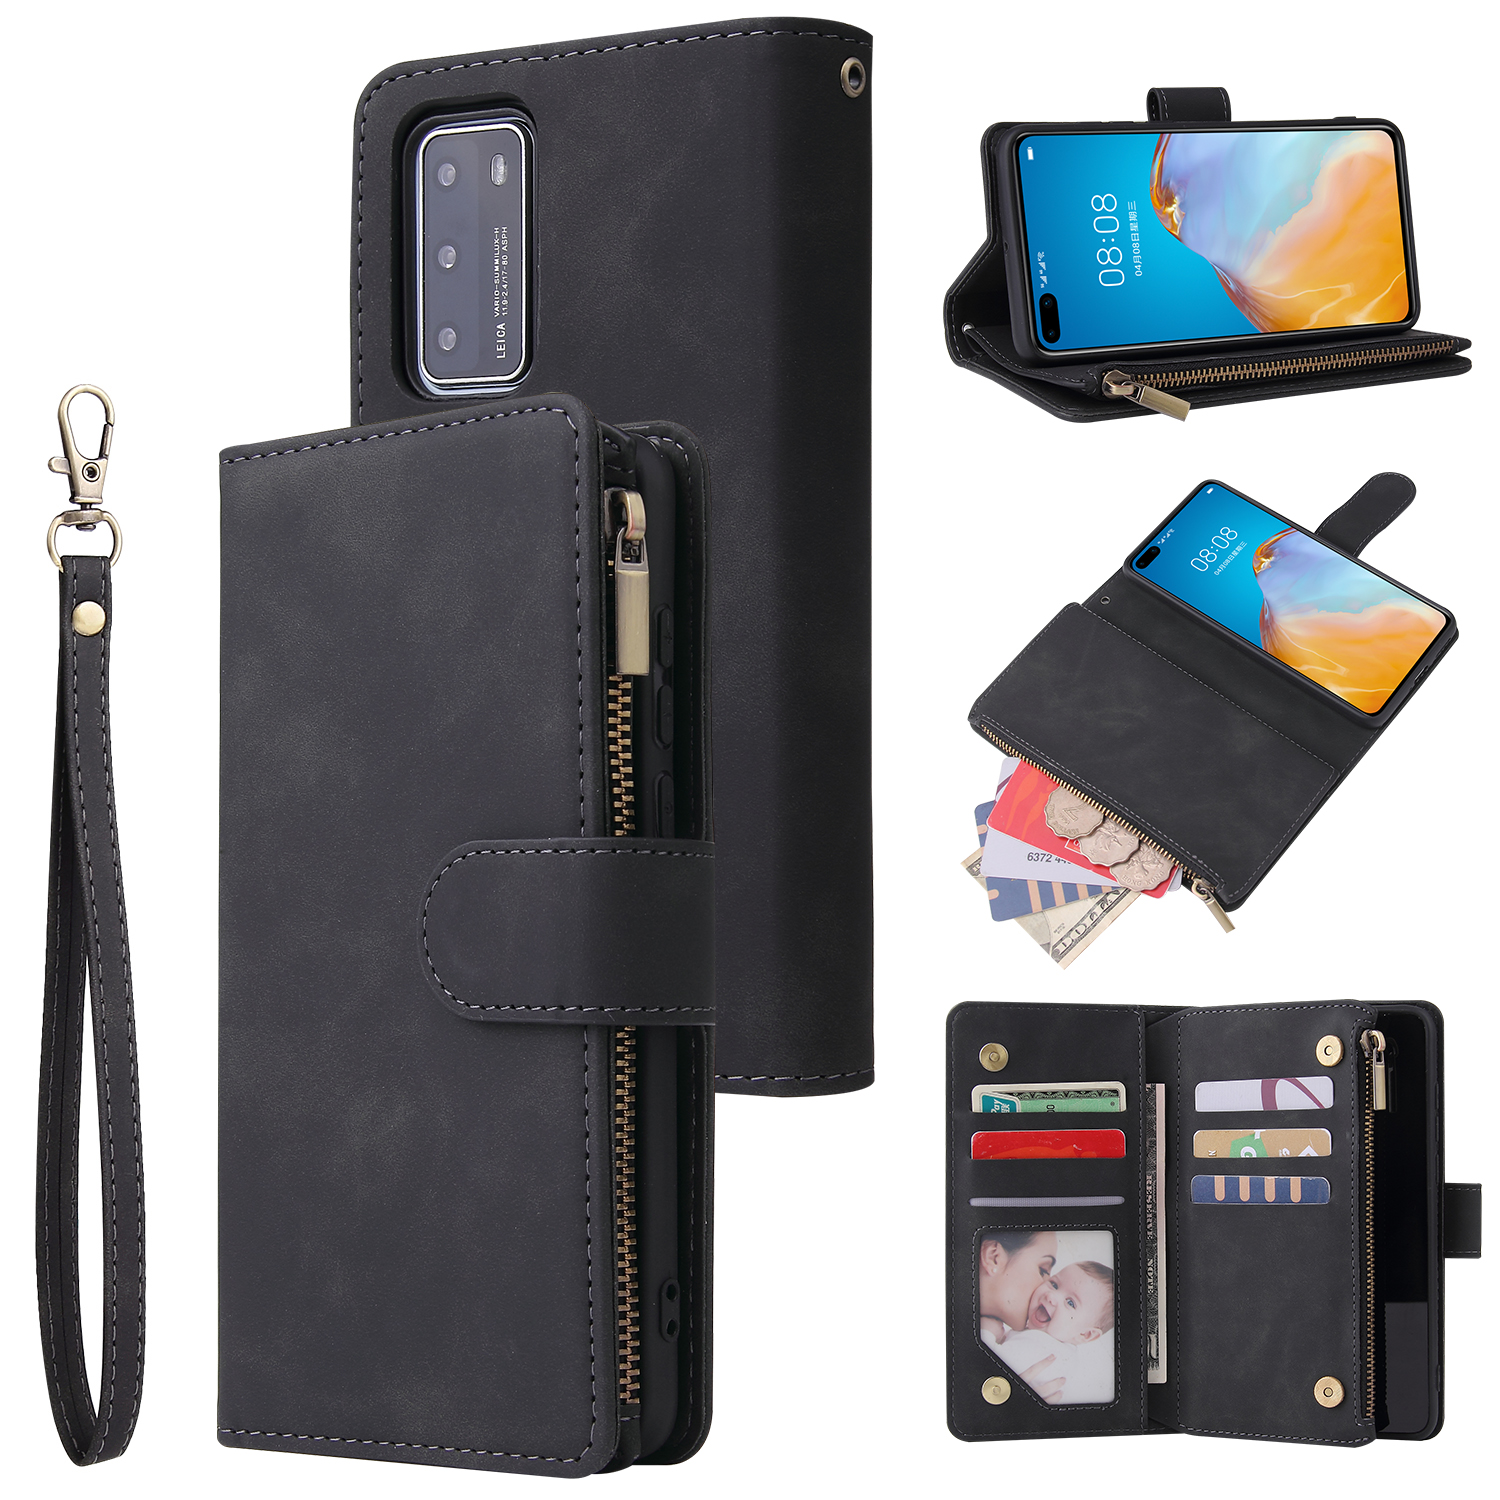 For HUAWEI P40 Case Smartphone Shell Wallet Design Zipper Closure Overall Protection Cellphone Cover  1 black